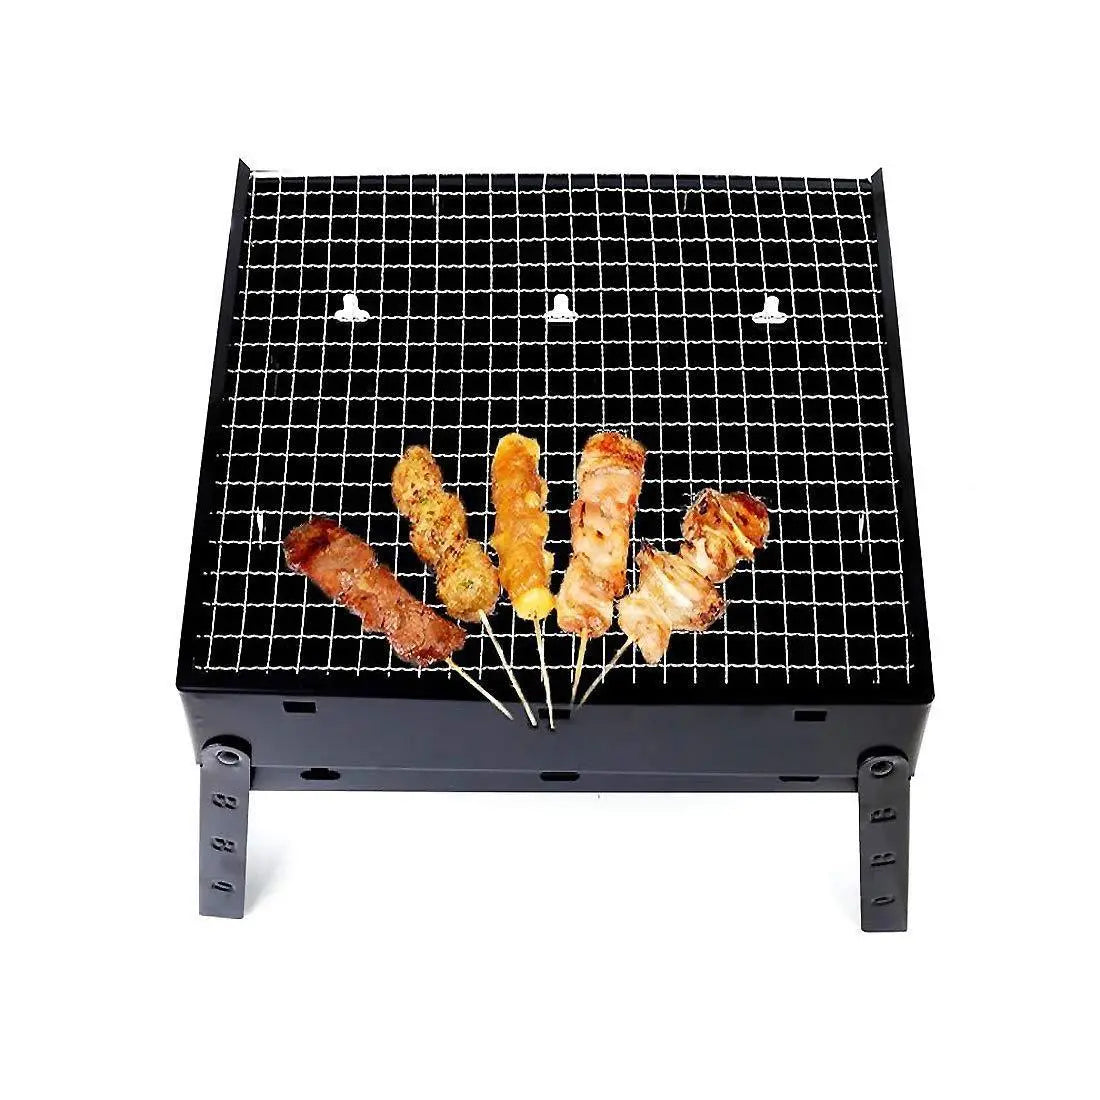 Barbeque Grill - Foldable Barbecue and Tandoor Grill for Camping Hiking Picnic - Utilityhubb